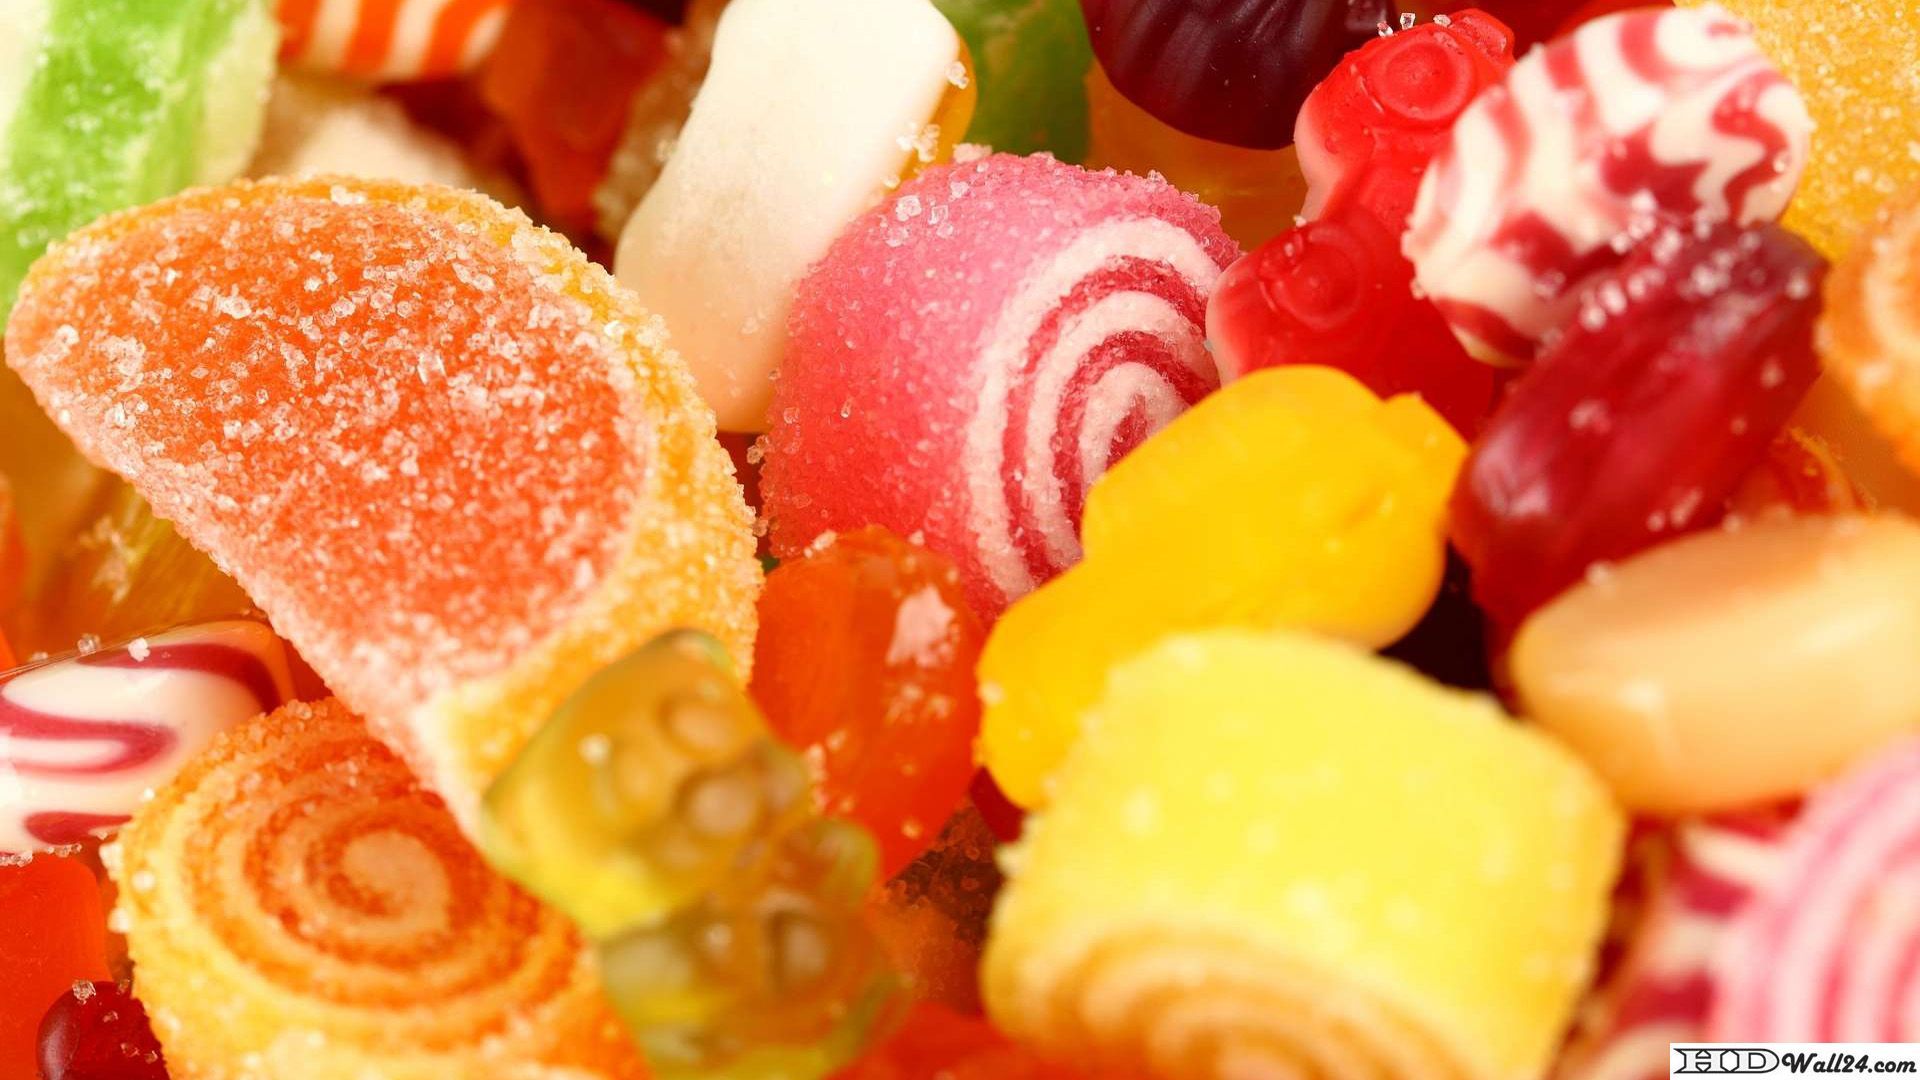 Various Candy Wallpaper. Free HD Wallpaper Download. Food wallpaper, Confectionery, Sweets